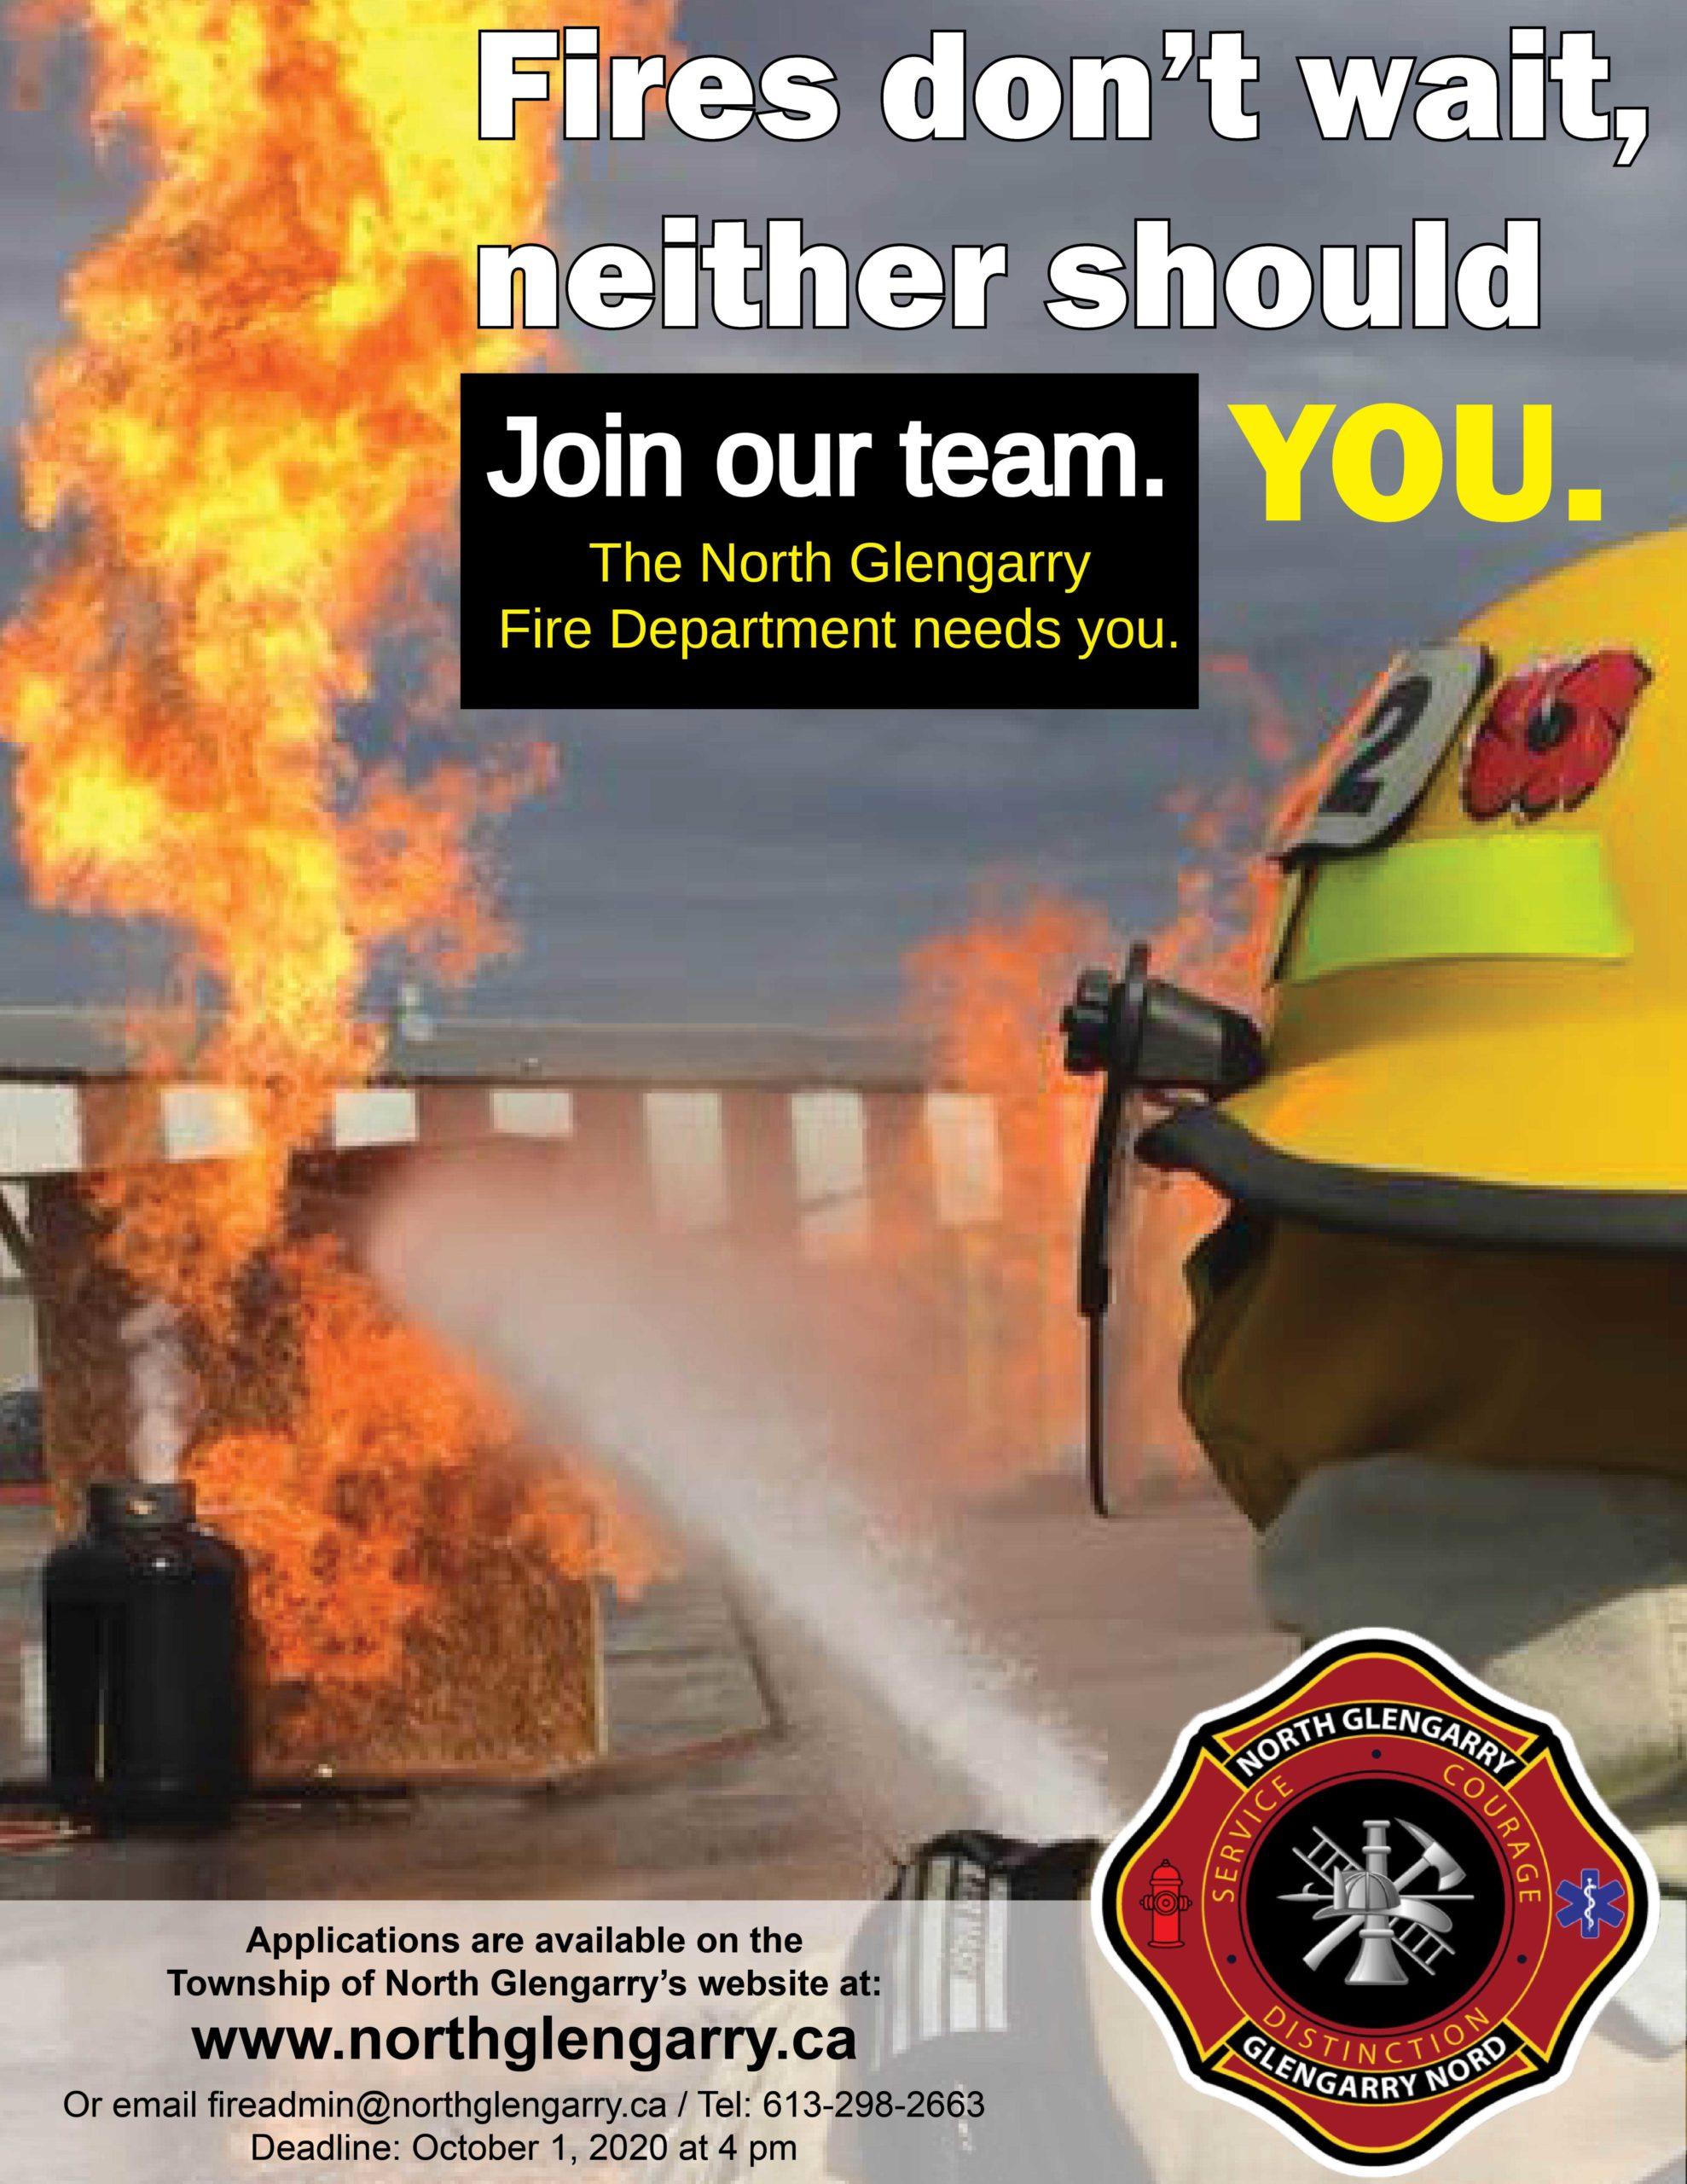 The North Glengarry Fire Department is recruiting